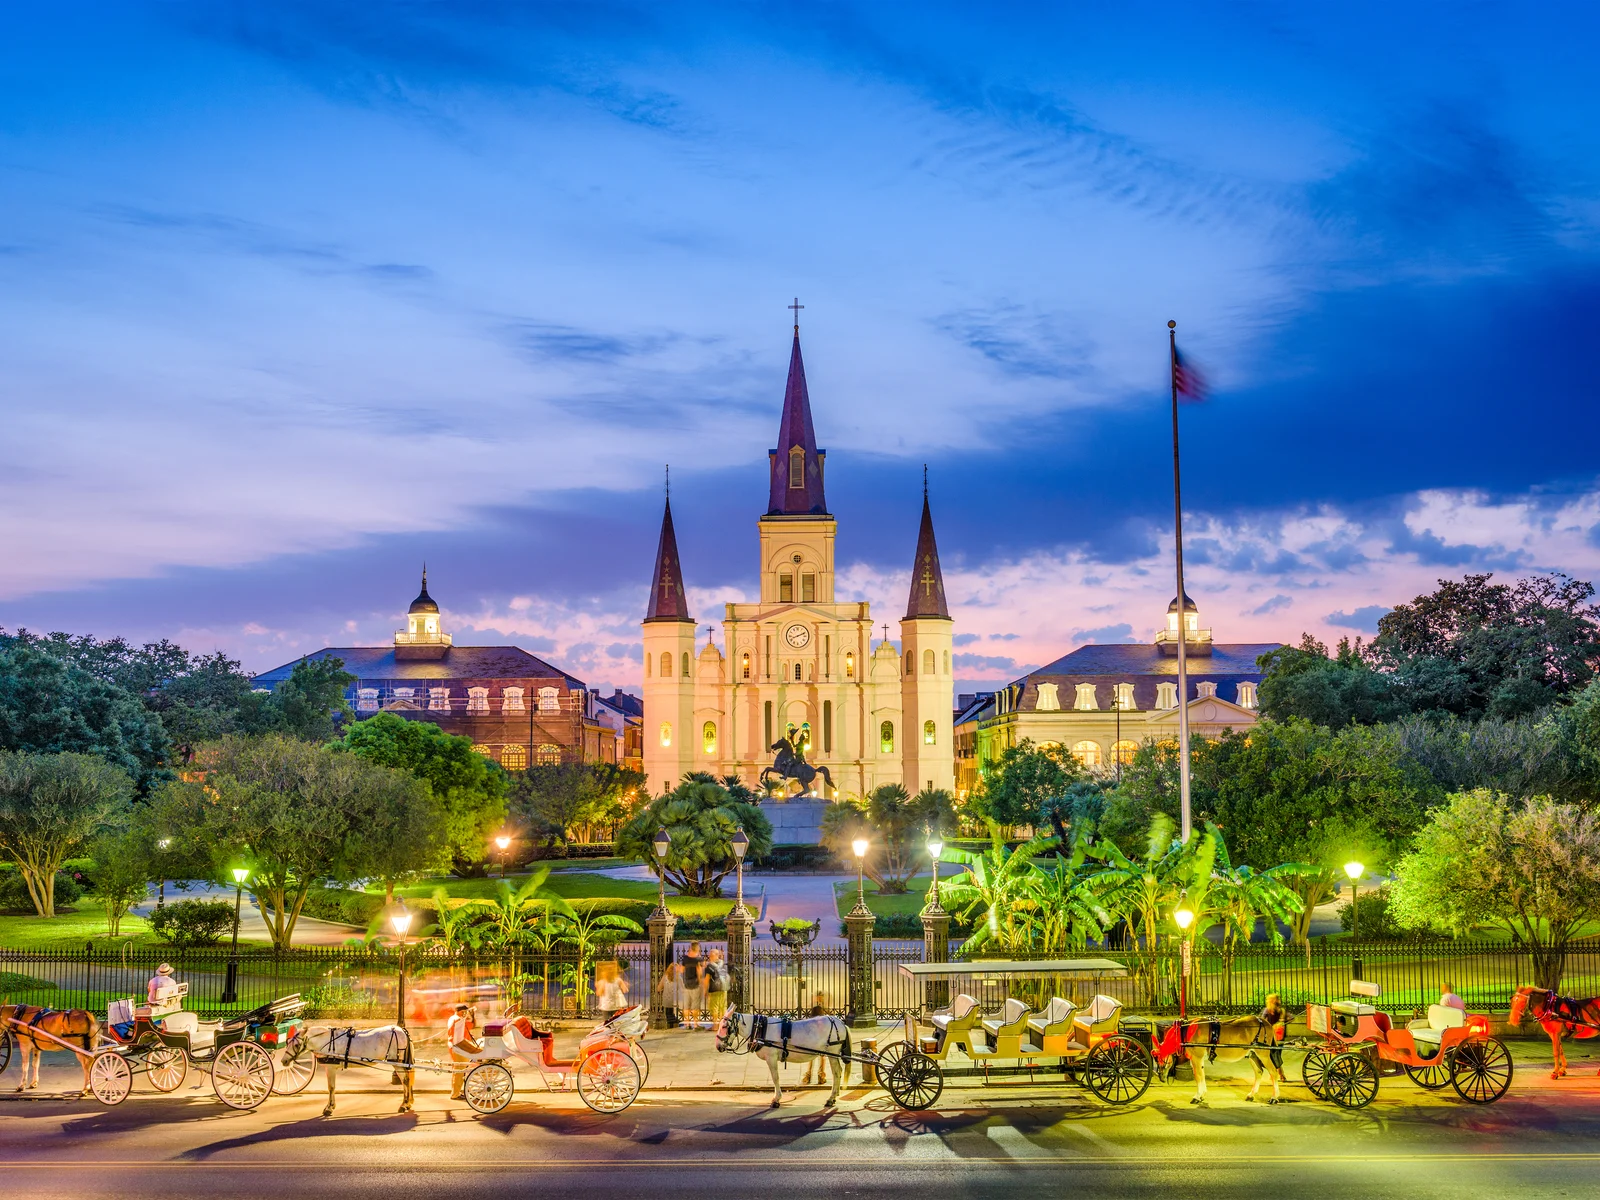 St. Louis Cathedral pictured during the best time to visit New Orleans